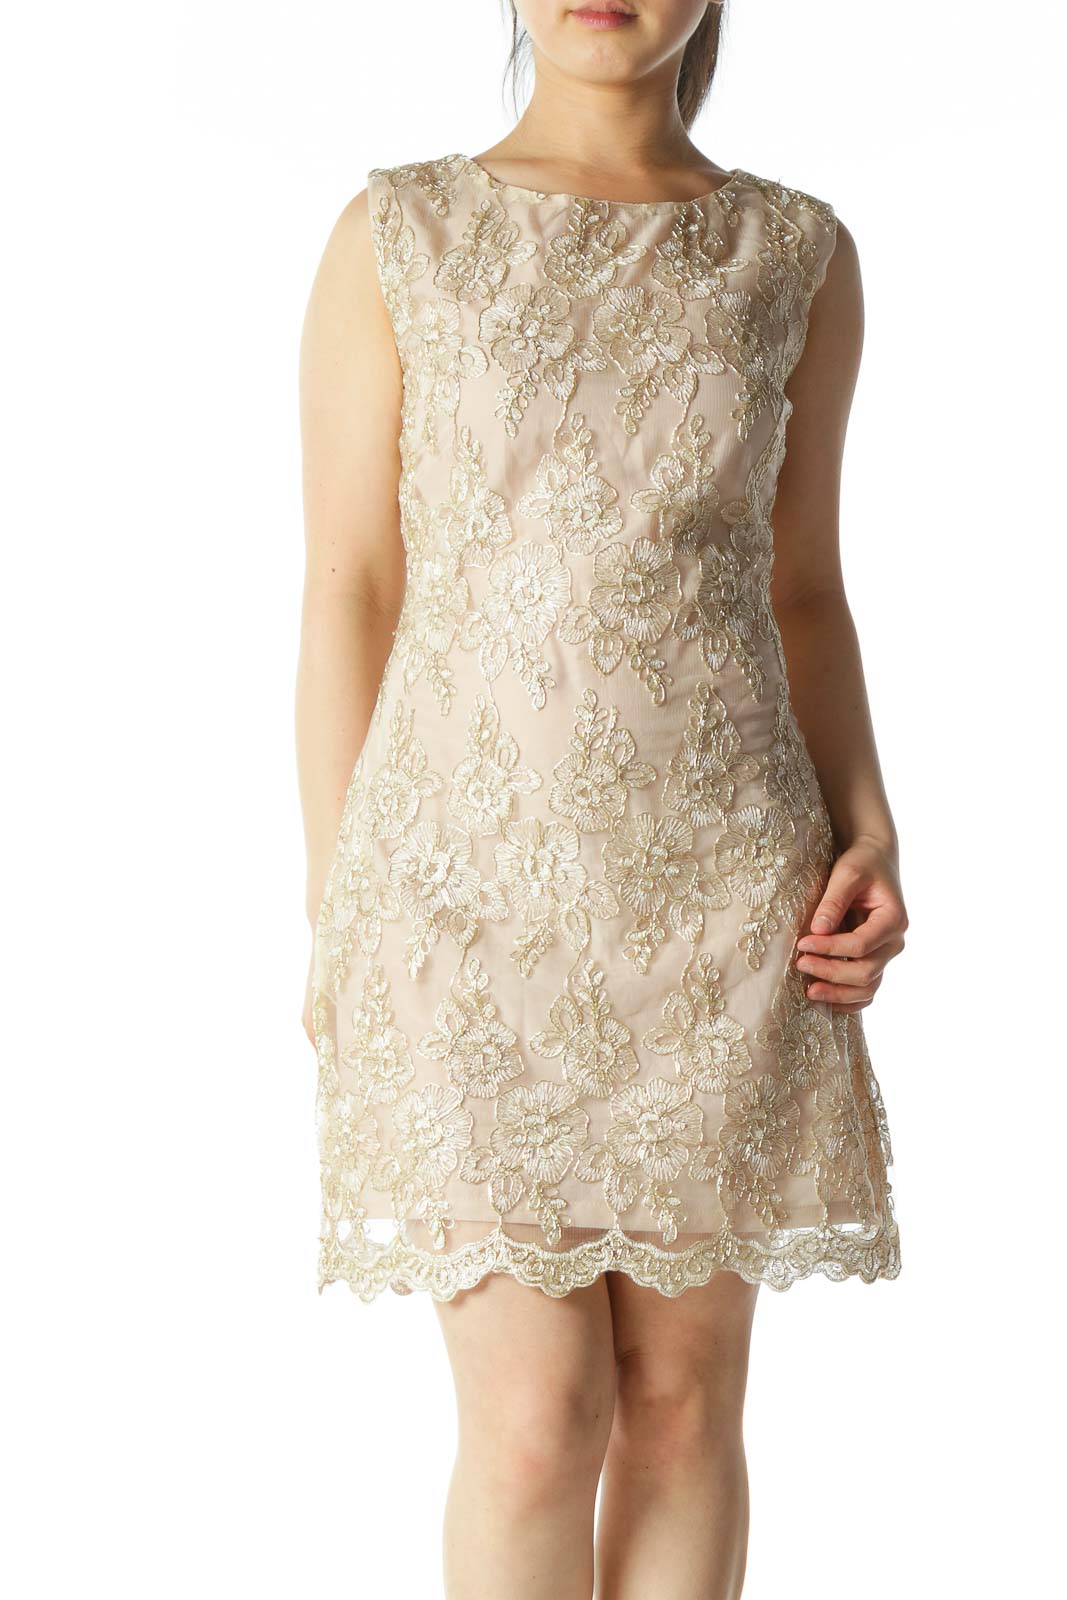 Beige/Gold Lace Flower Embroidery Cocktail Dress Front